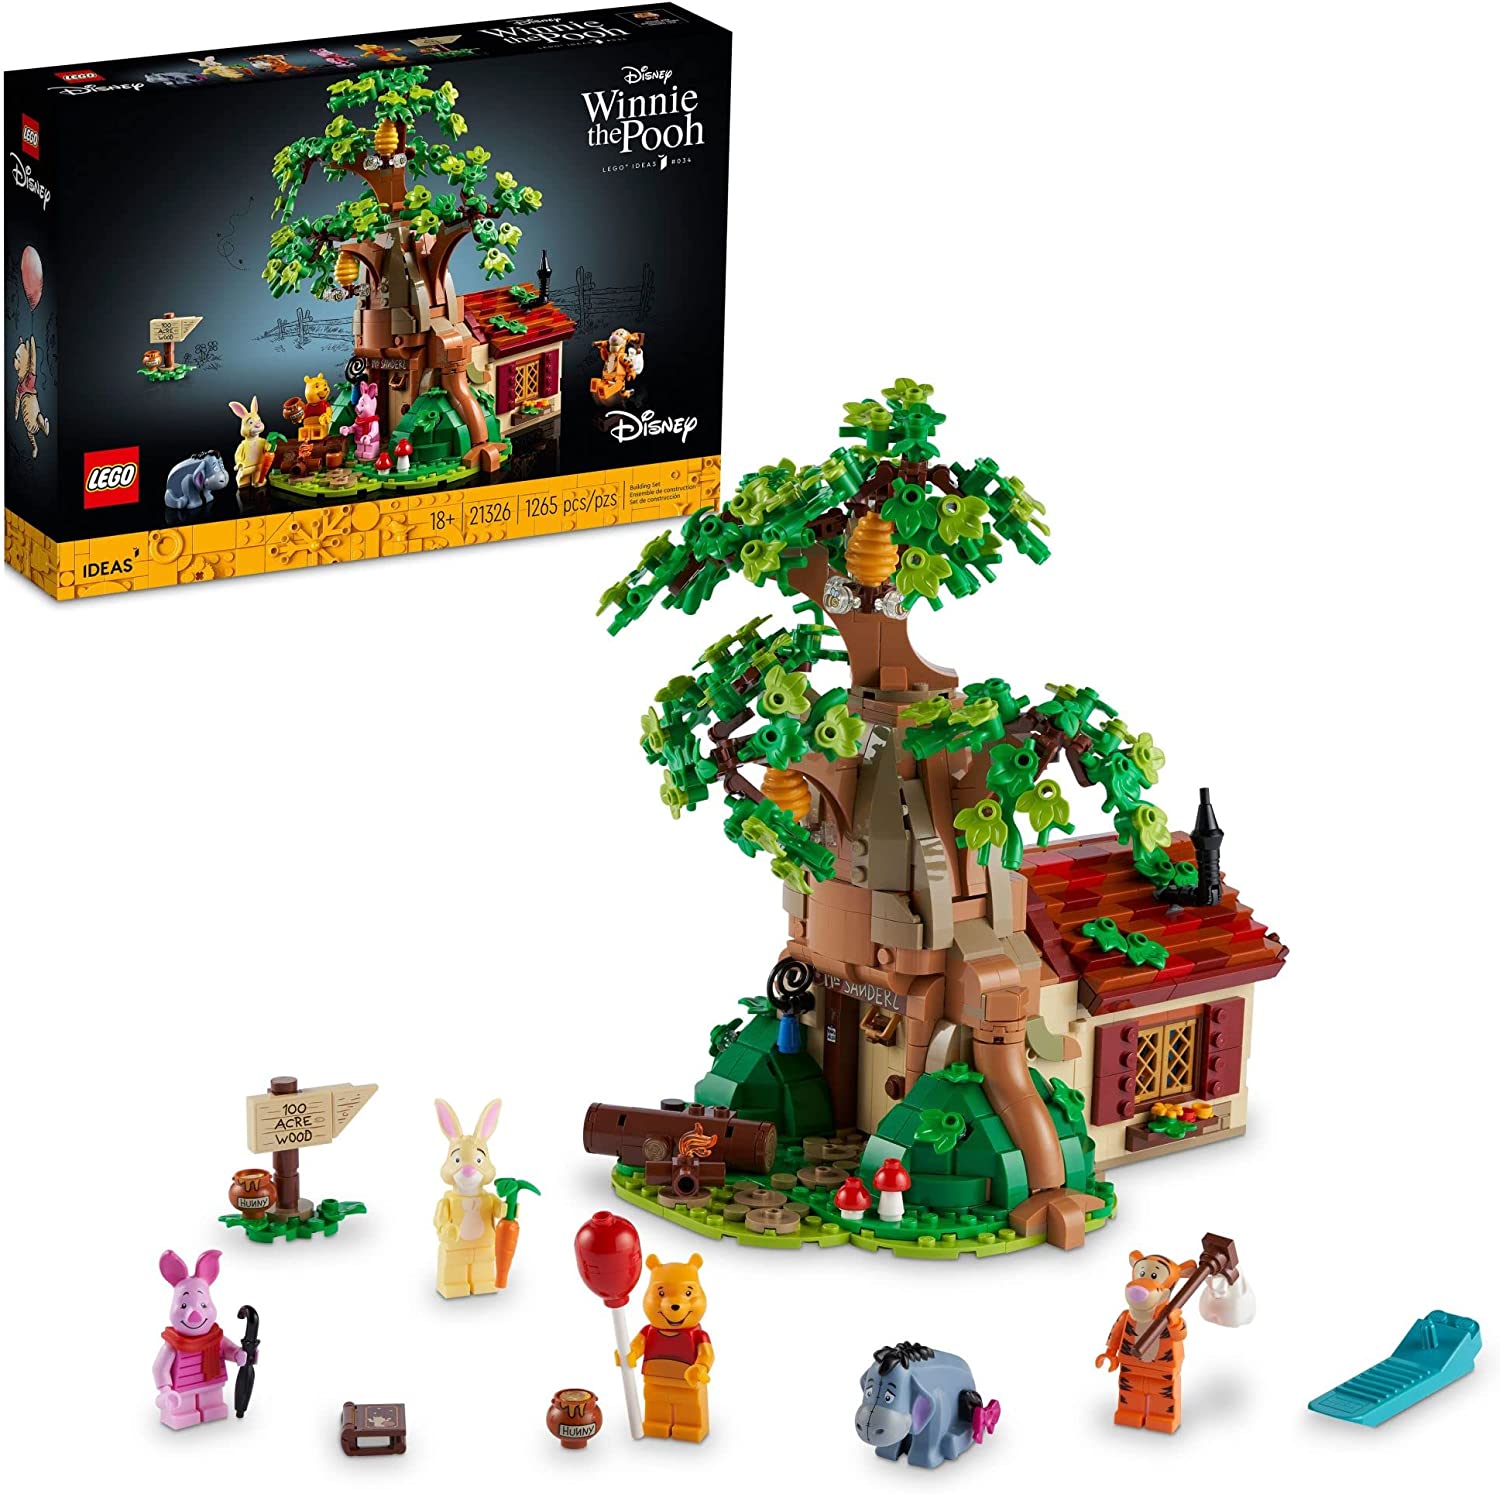 LEGO Ideas Disney Winnie the Pooh 21326 Building Set - with Piglet, Eeyore and Pooh Bear Minifigure - image 1 of 8